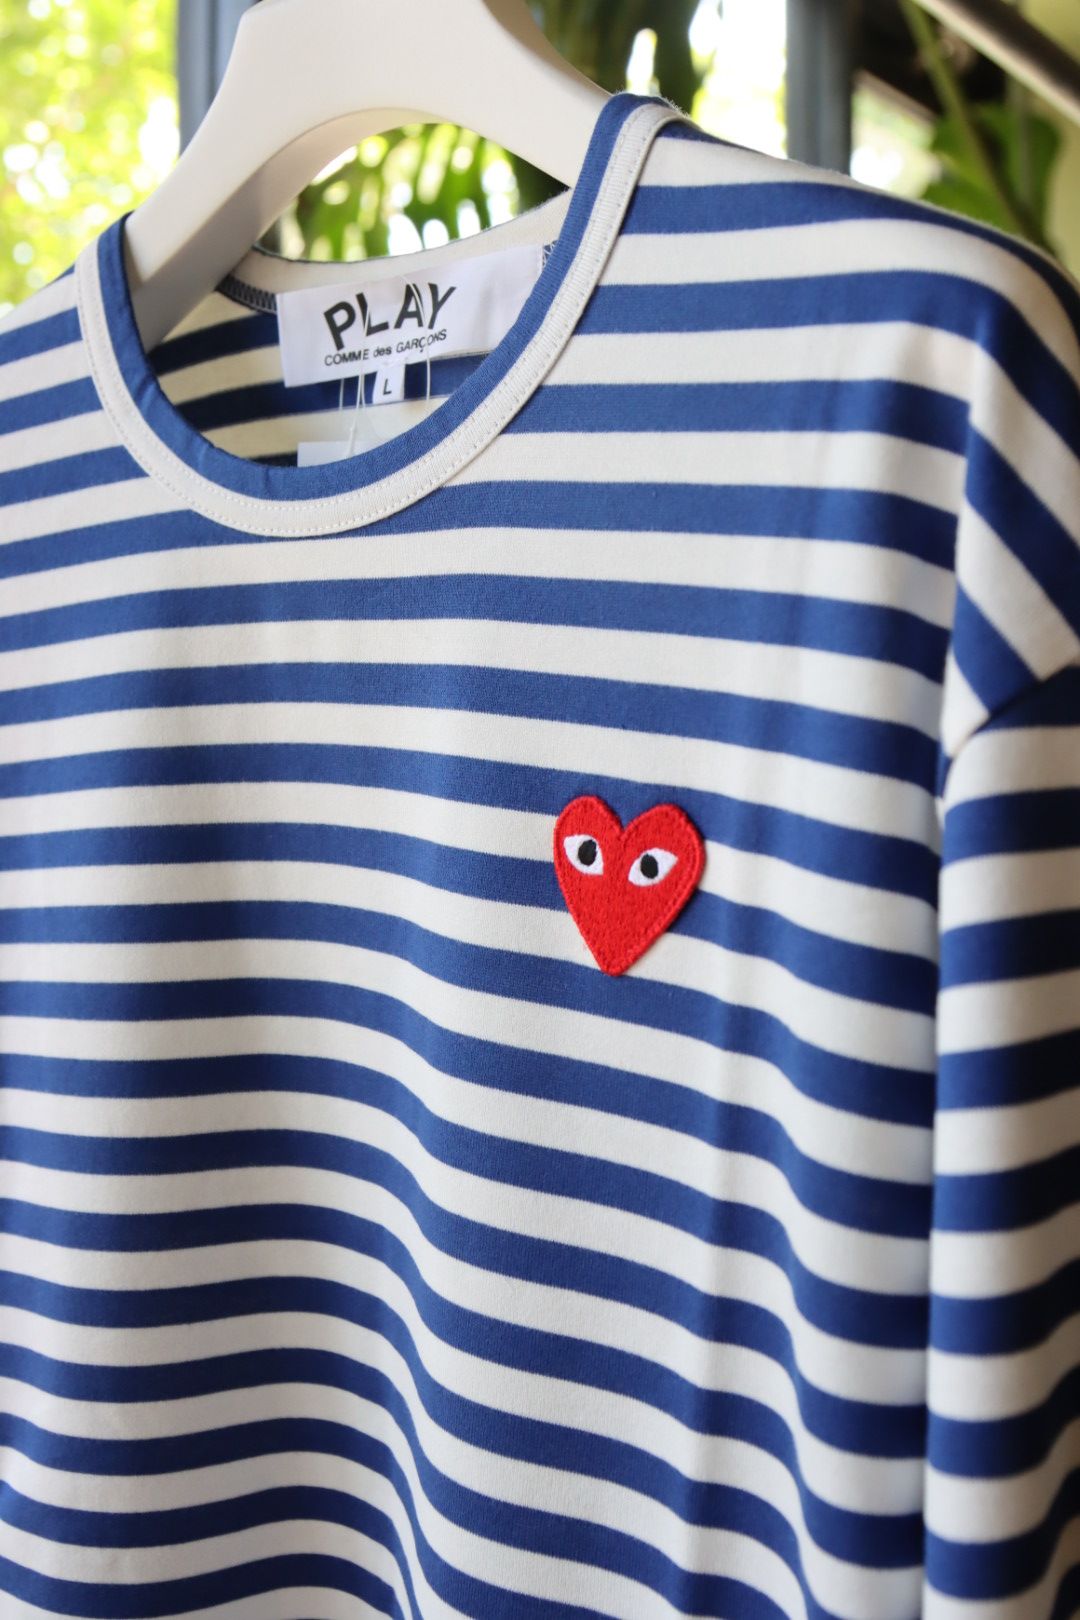 PLAY COMME des GARCONS - プレイコムデギャルソン ボーダーTシャツ 